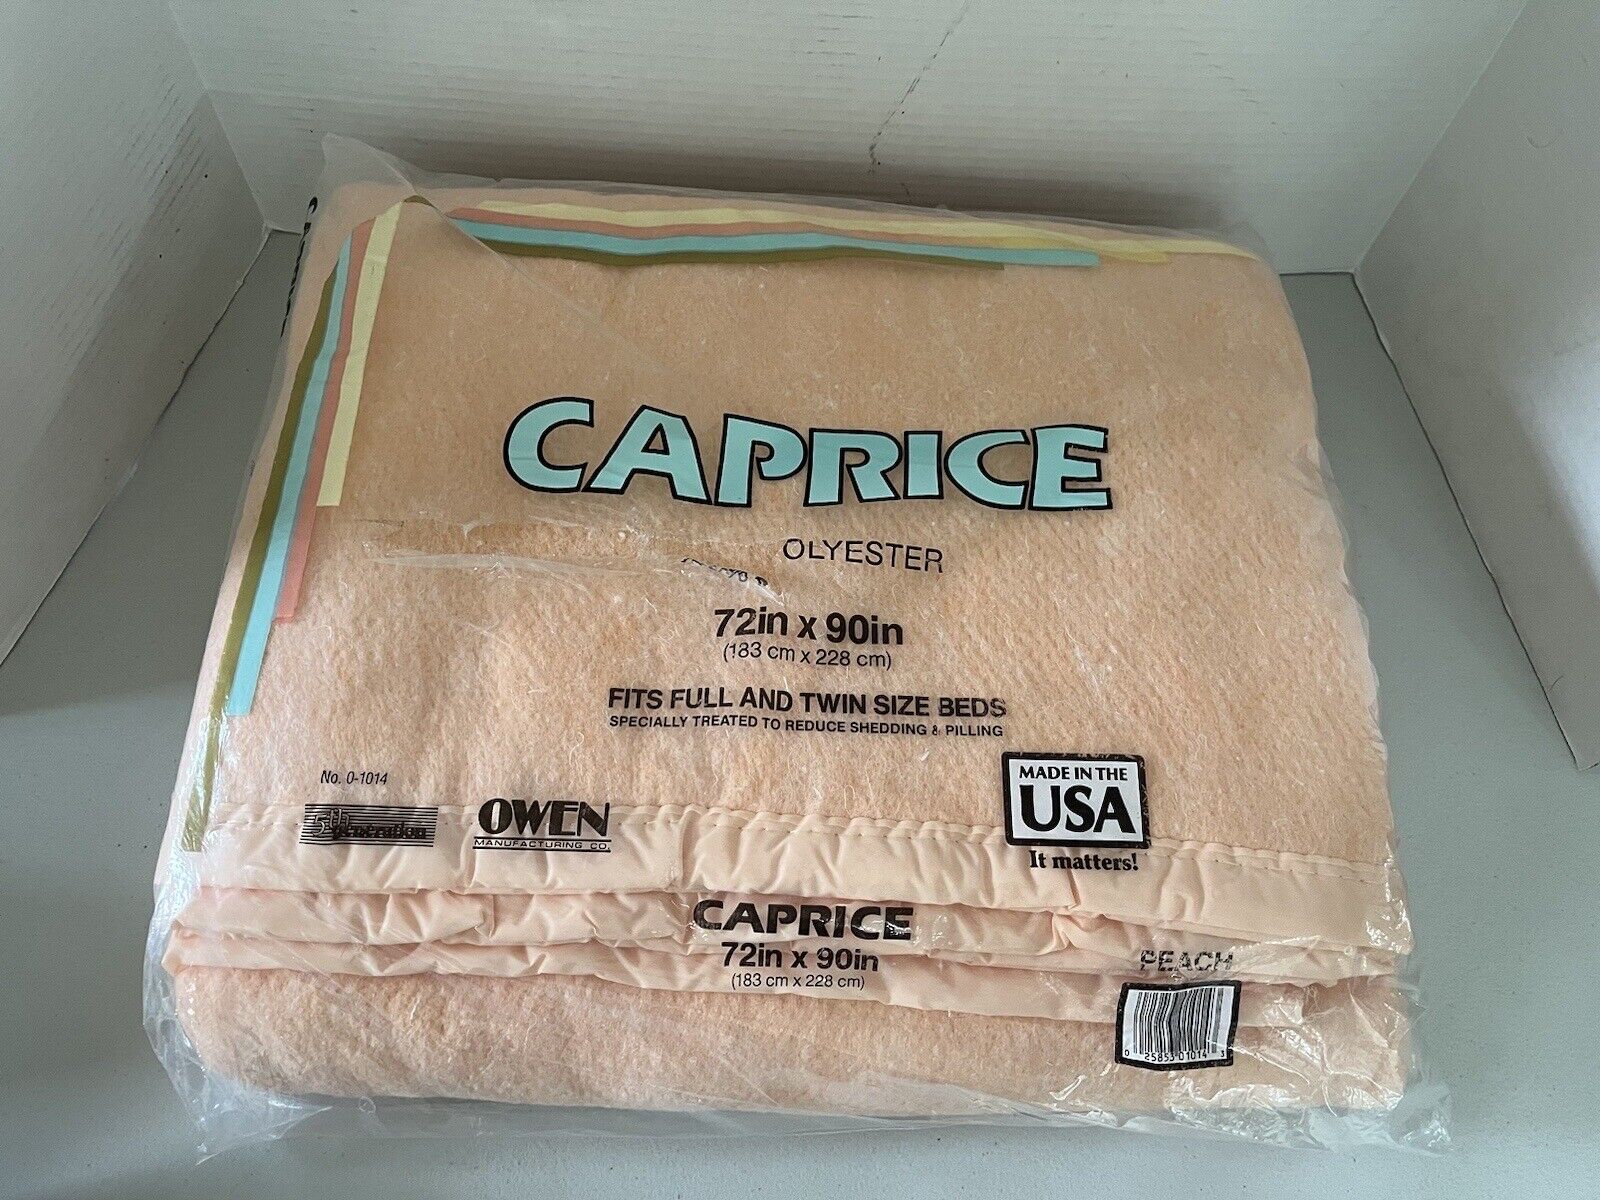 Vintage Caprice Blanket 72in x 90in Polyester Fits Full And Twin Peach New Throw